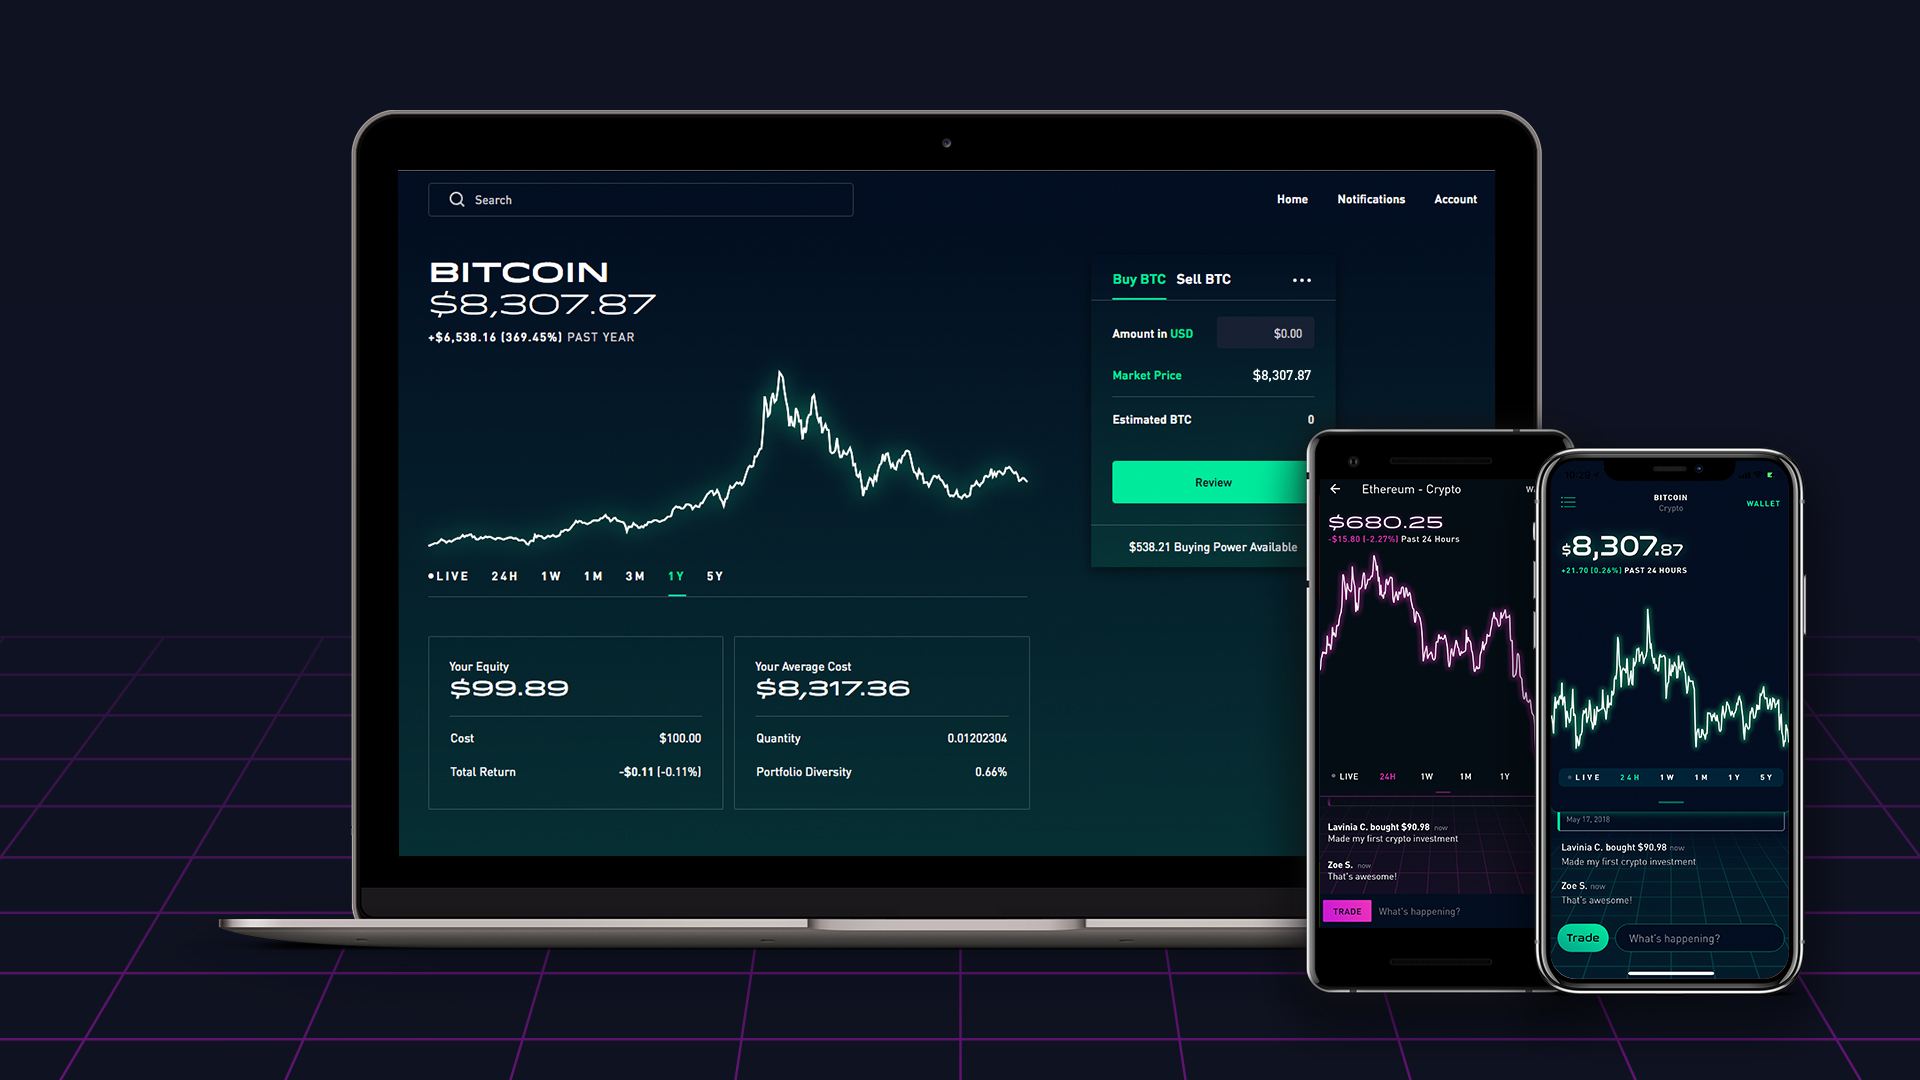 Robinhood lets you invest as little as 1 cent in any stock